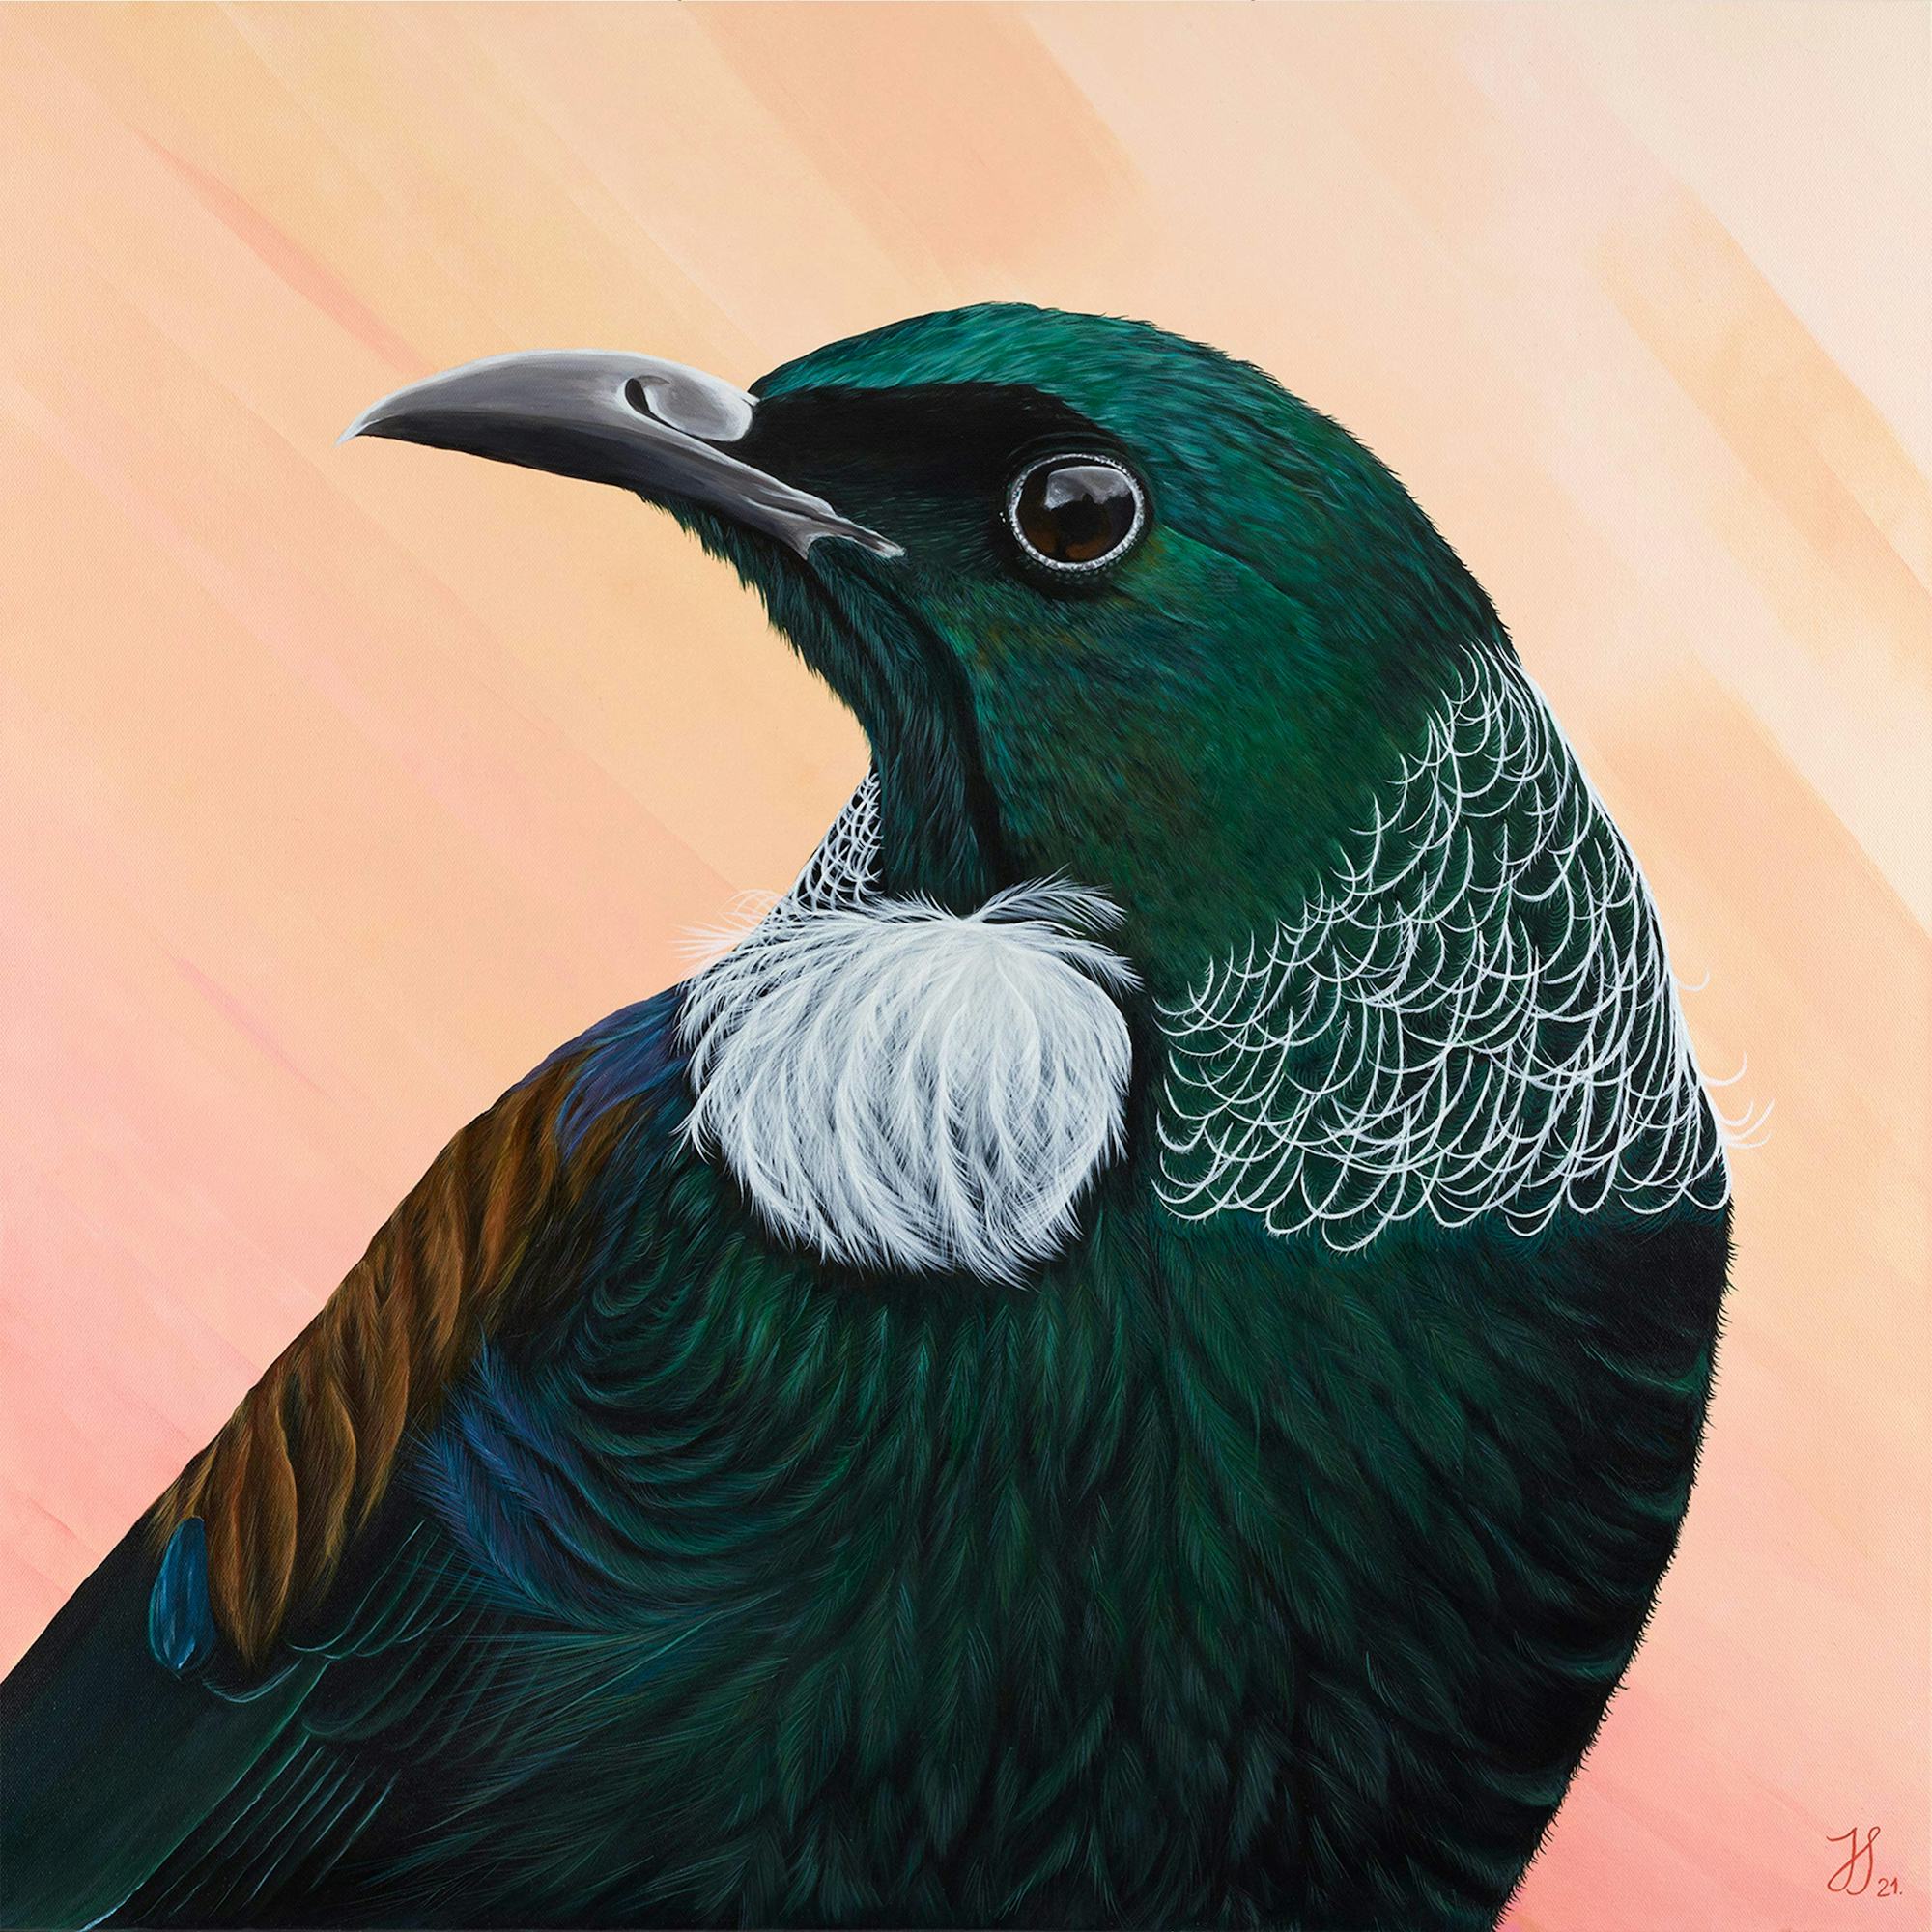 Original painting of a stunning NZ native Tui bird in all its beauty.